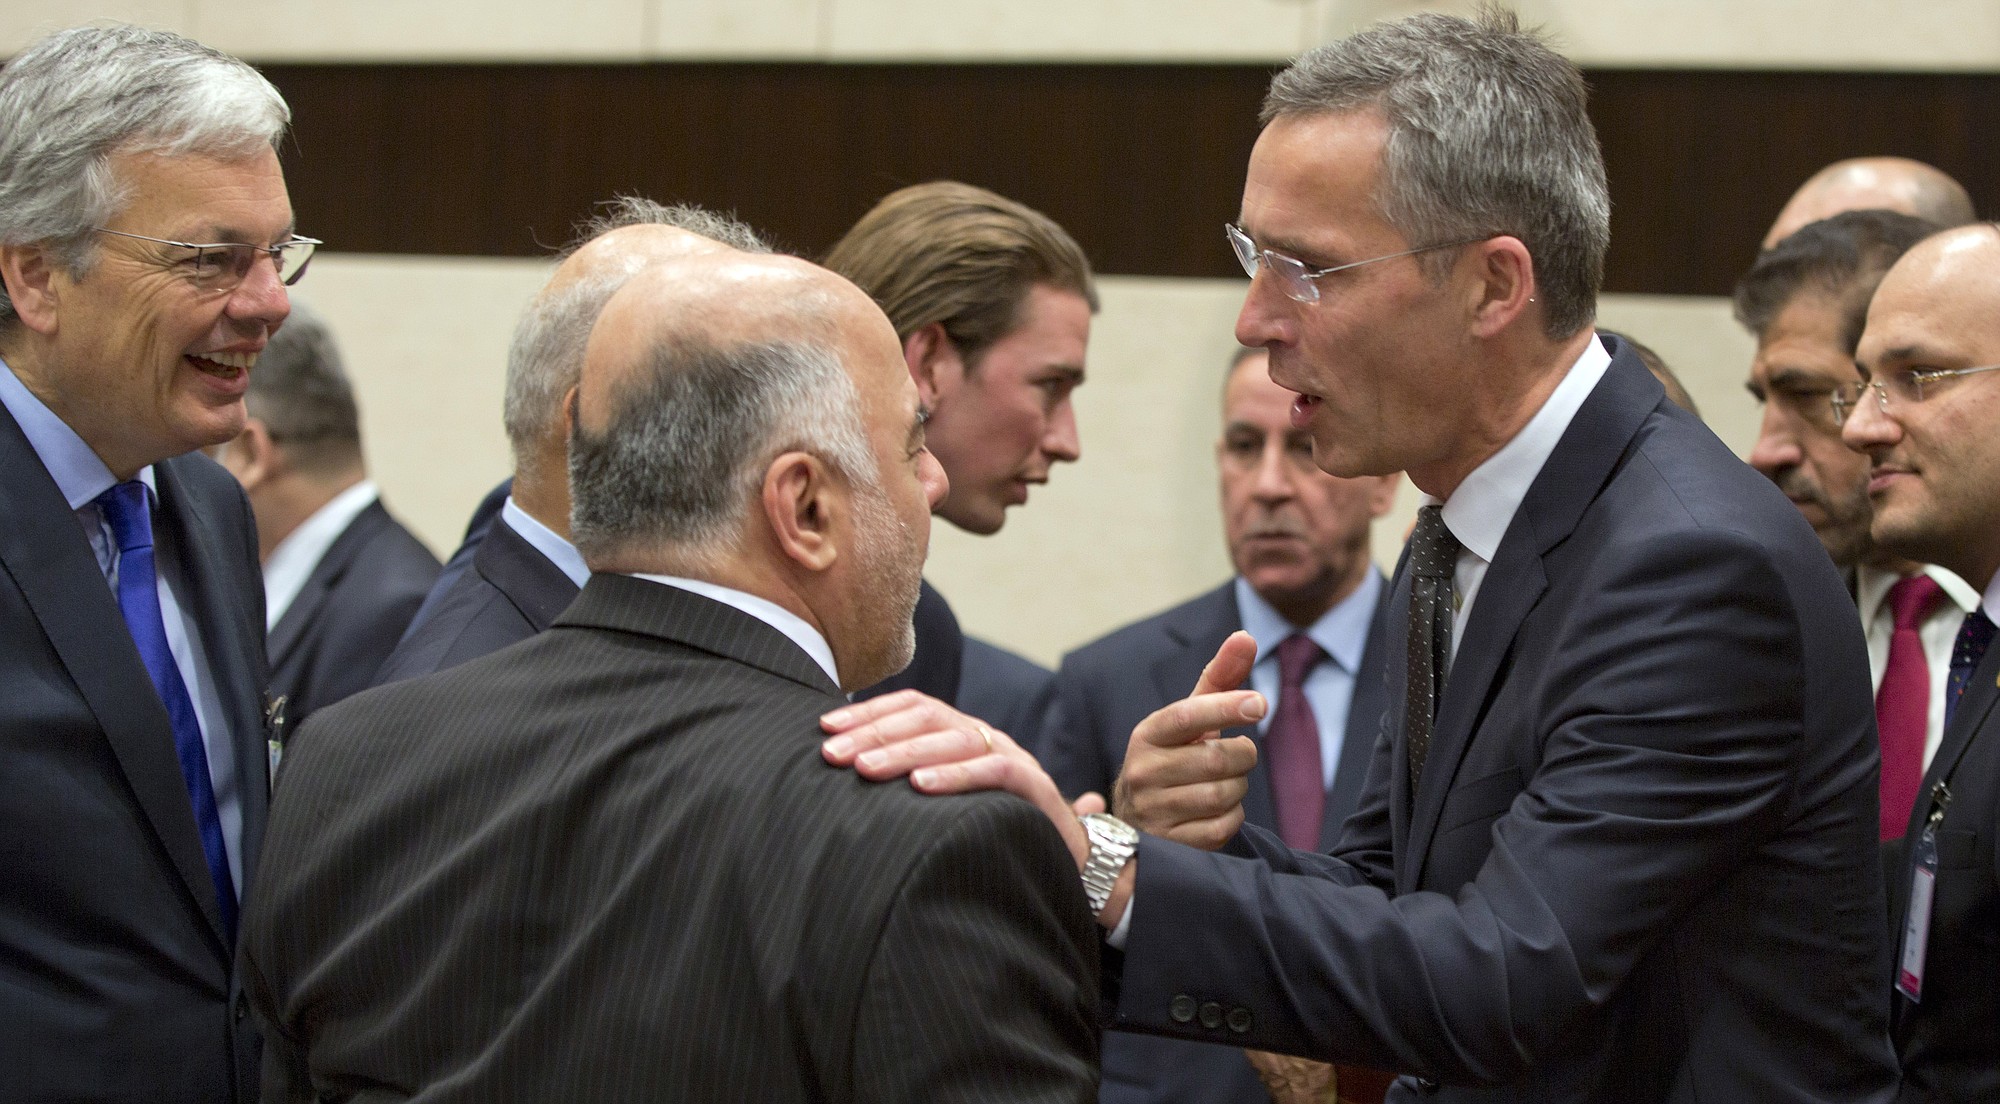 NATO Secretary General Jens Stoltenberg, center right, speaks with Iraqi Prime Minister Haider al-Abadi, center left, during a round table meeting of the global coalition to counter the Islamic State militant group at NATO headquarters in Brussels on Wednesday.